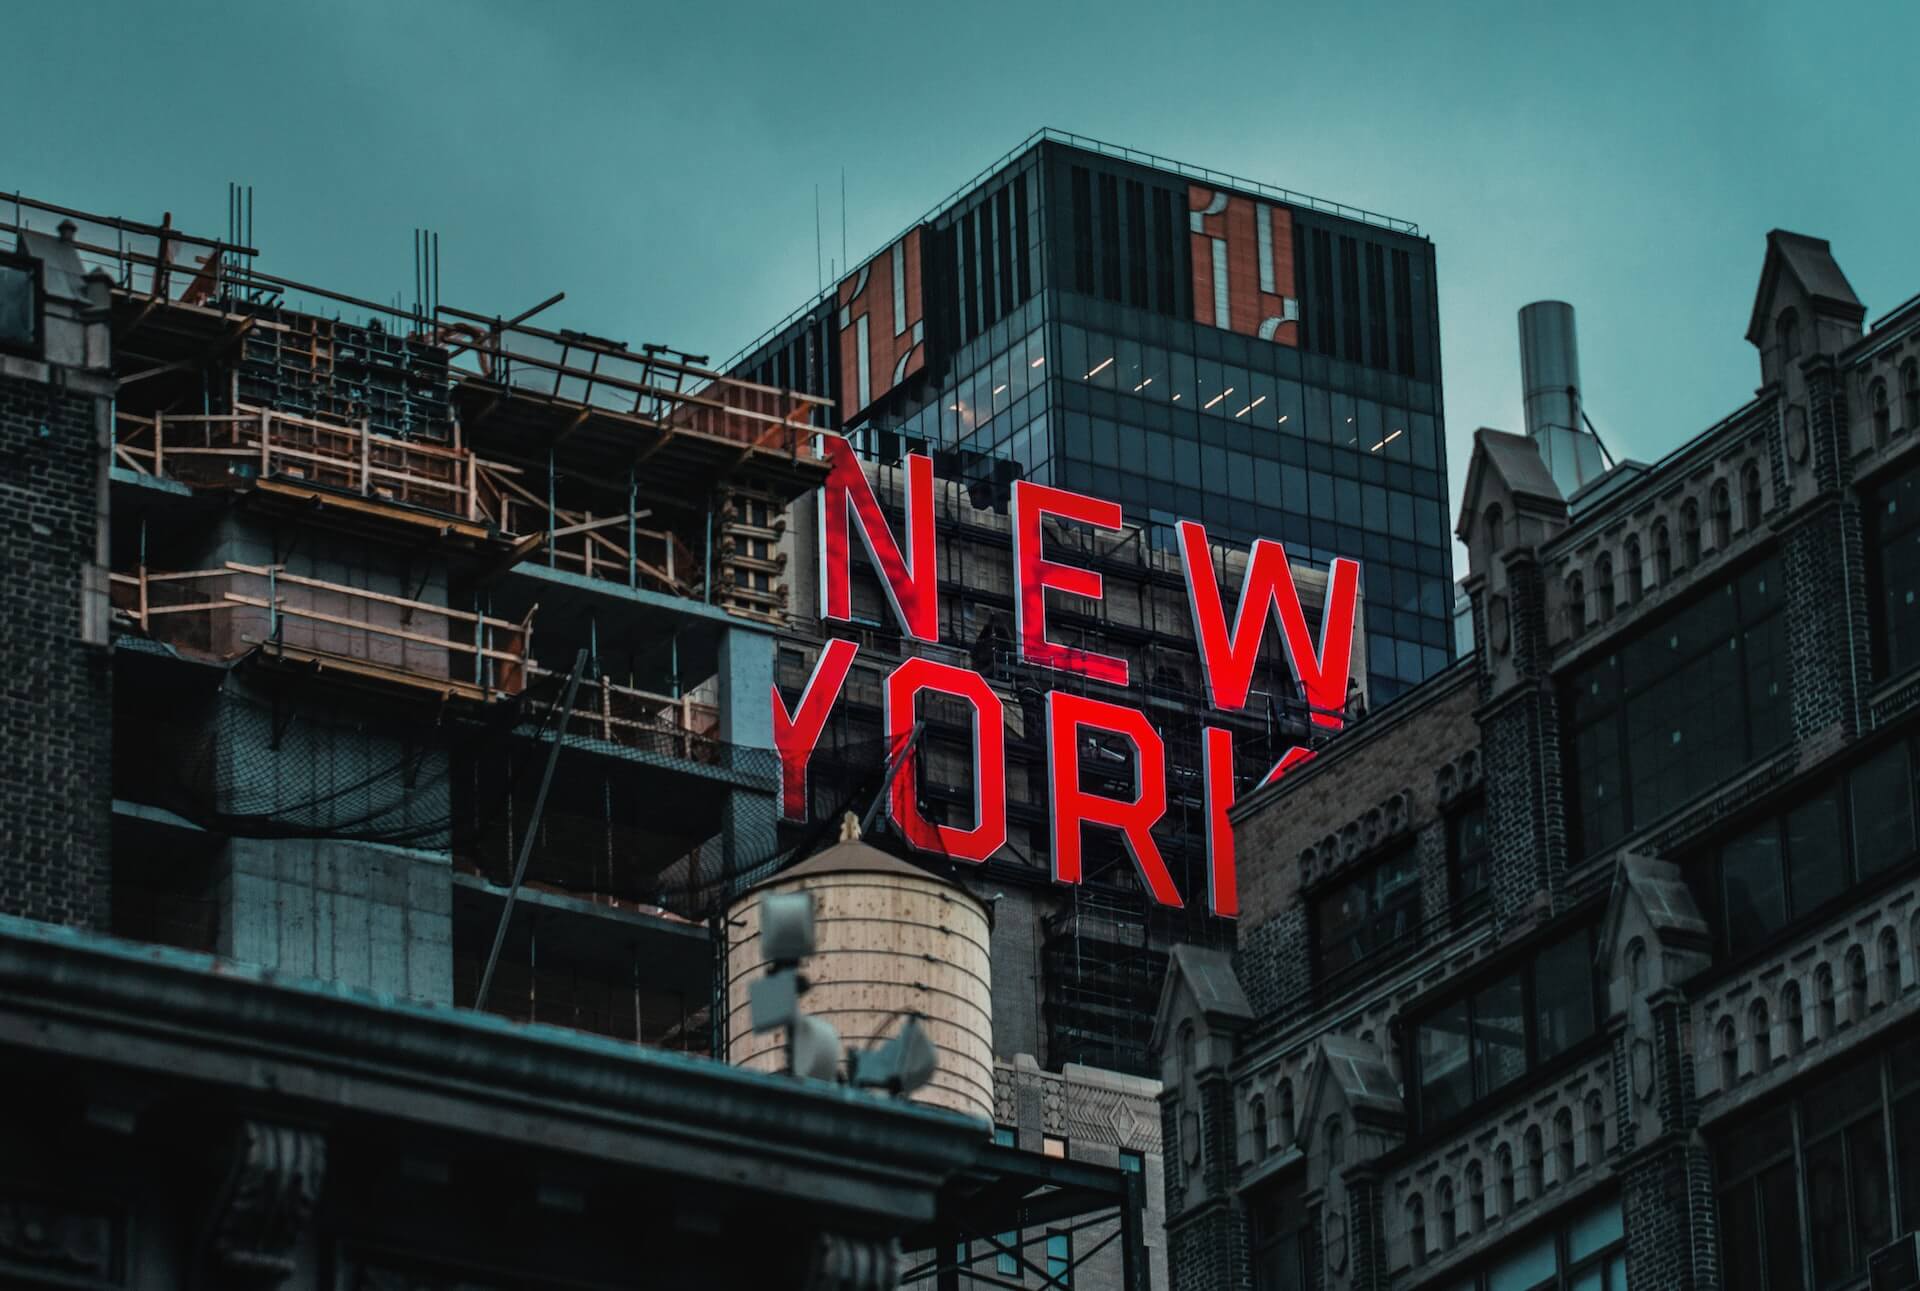 Red "New York" sign on building